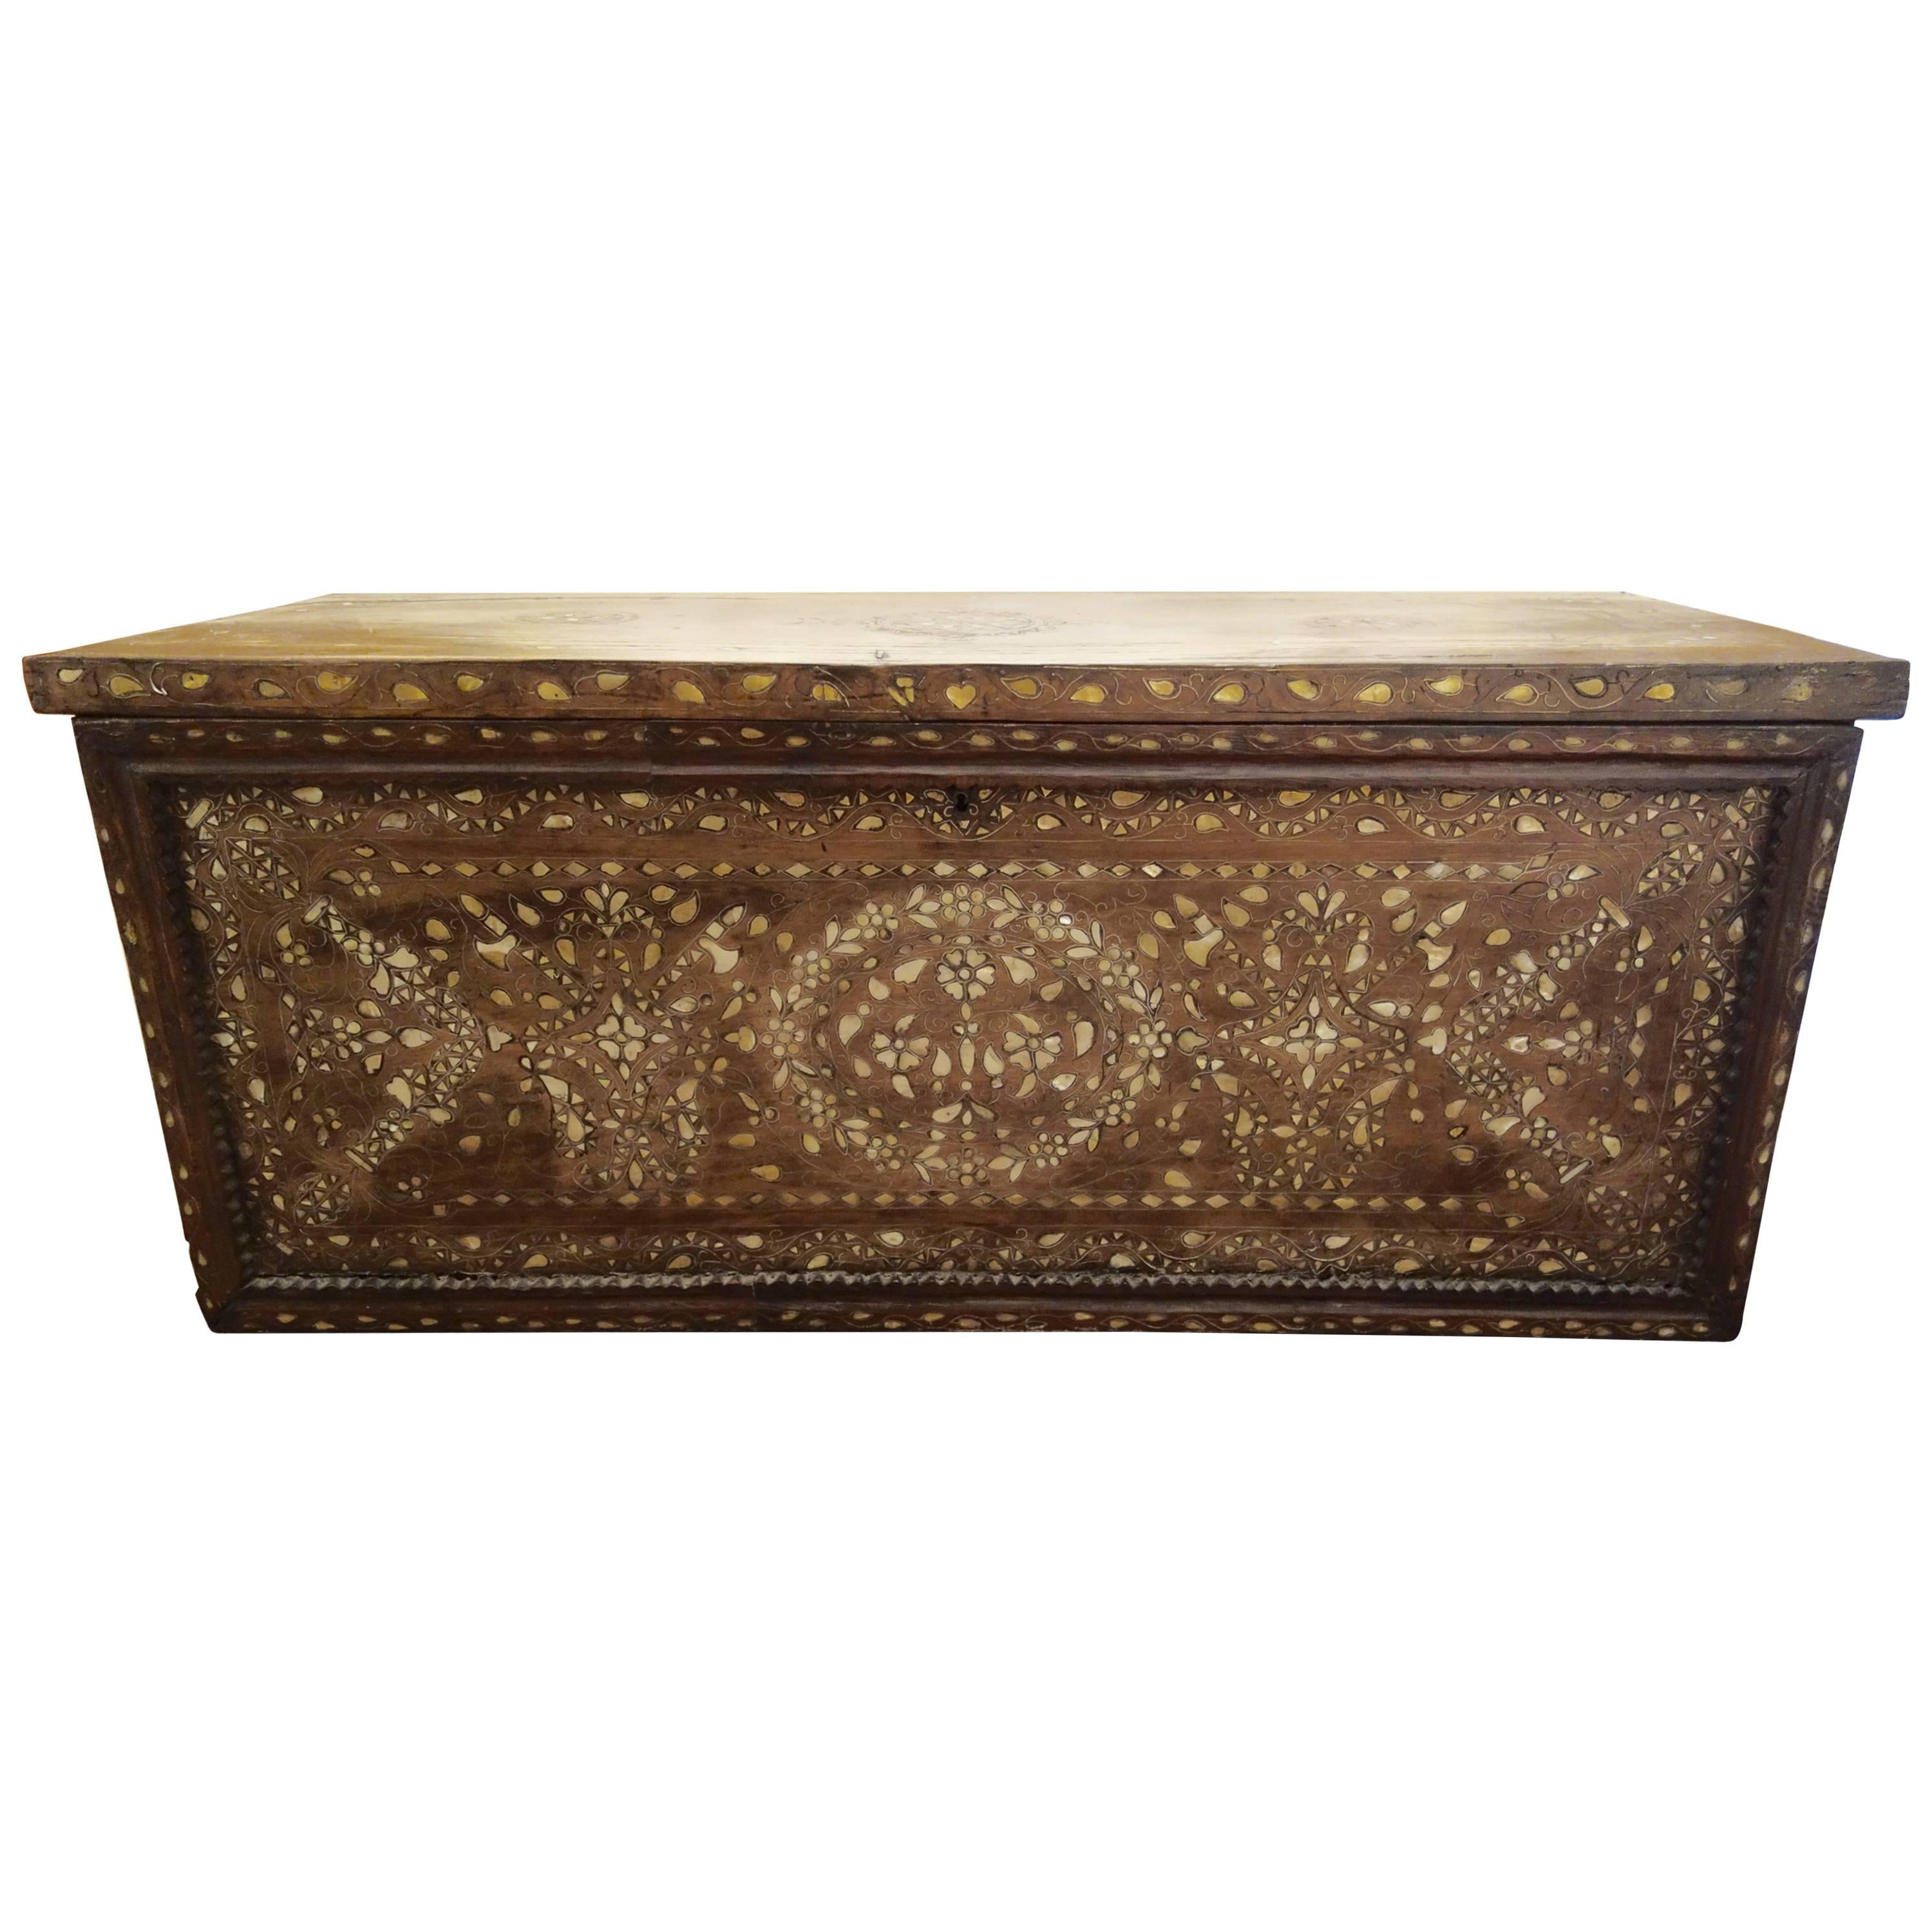 Large 19th Century Syrian Trunk with Mother-of-Pearl Inlay